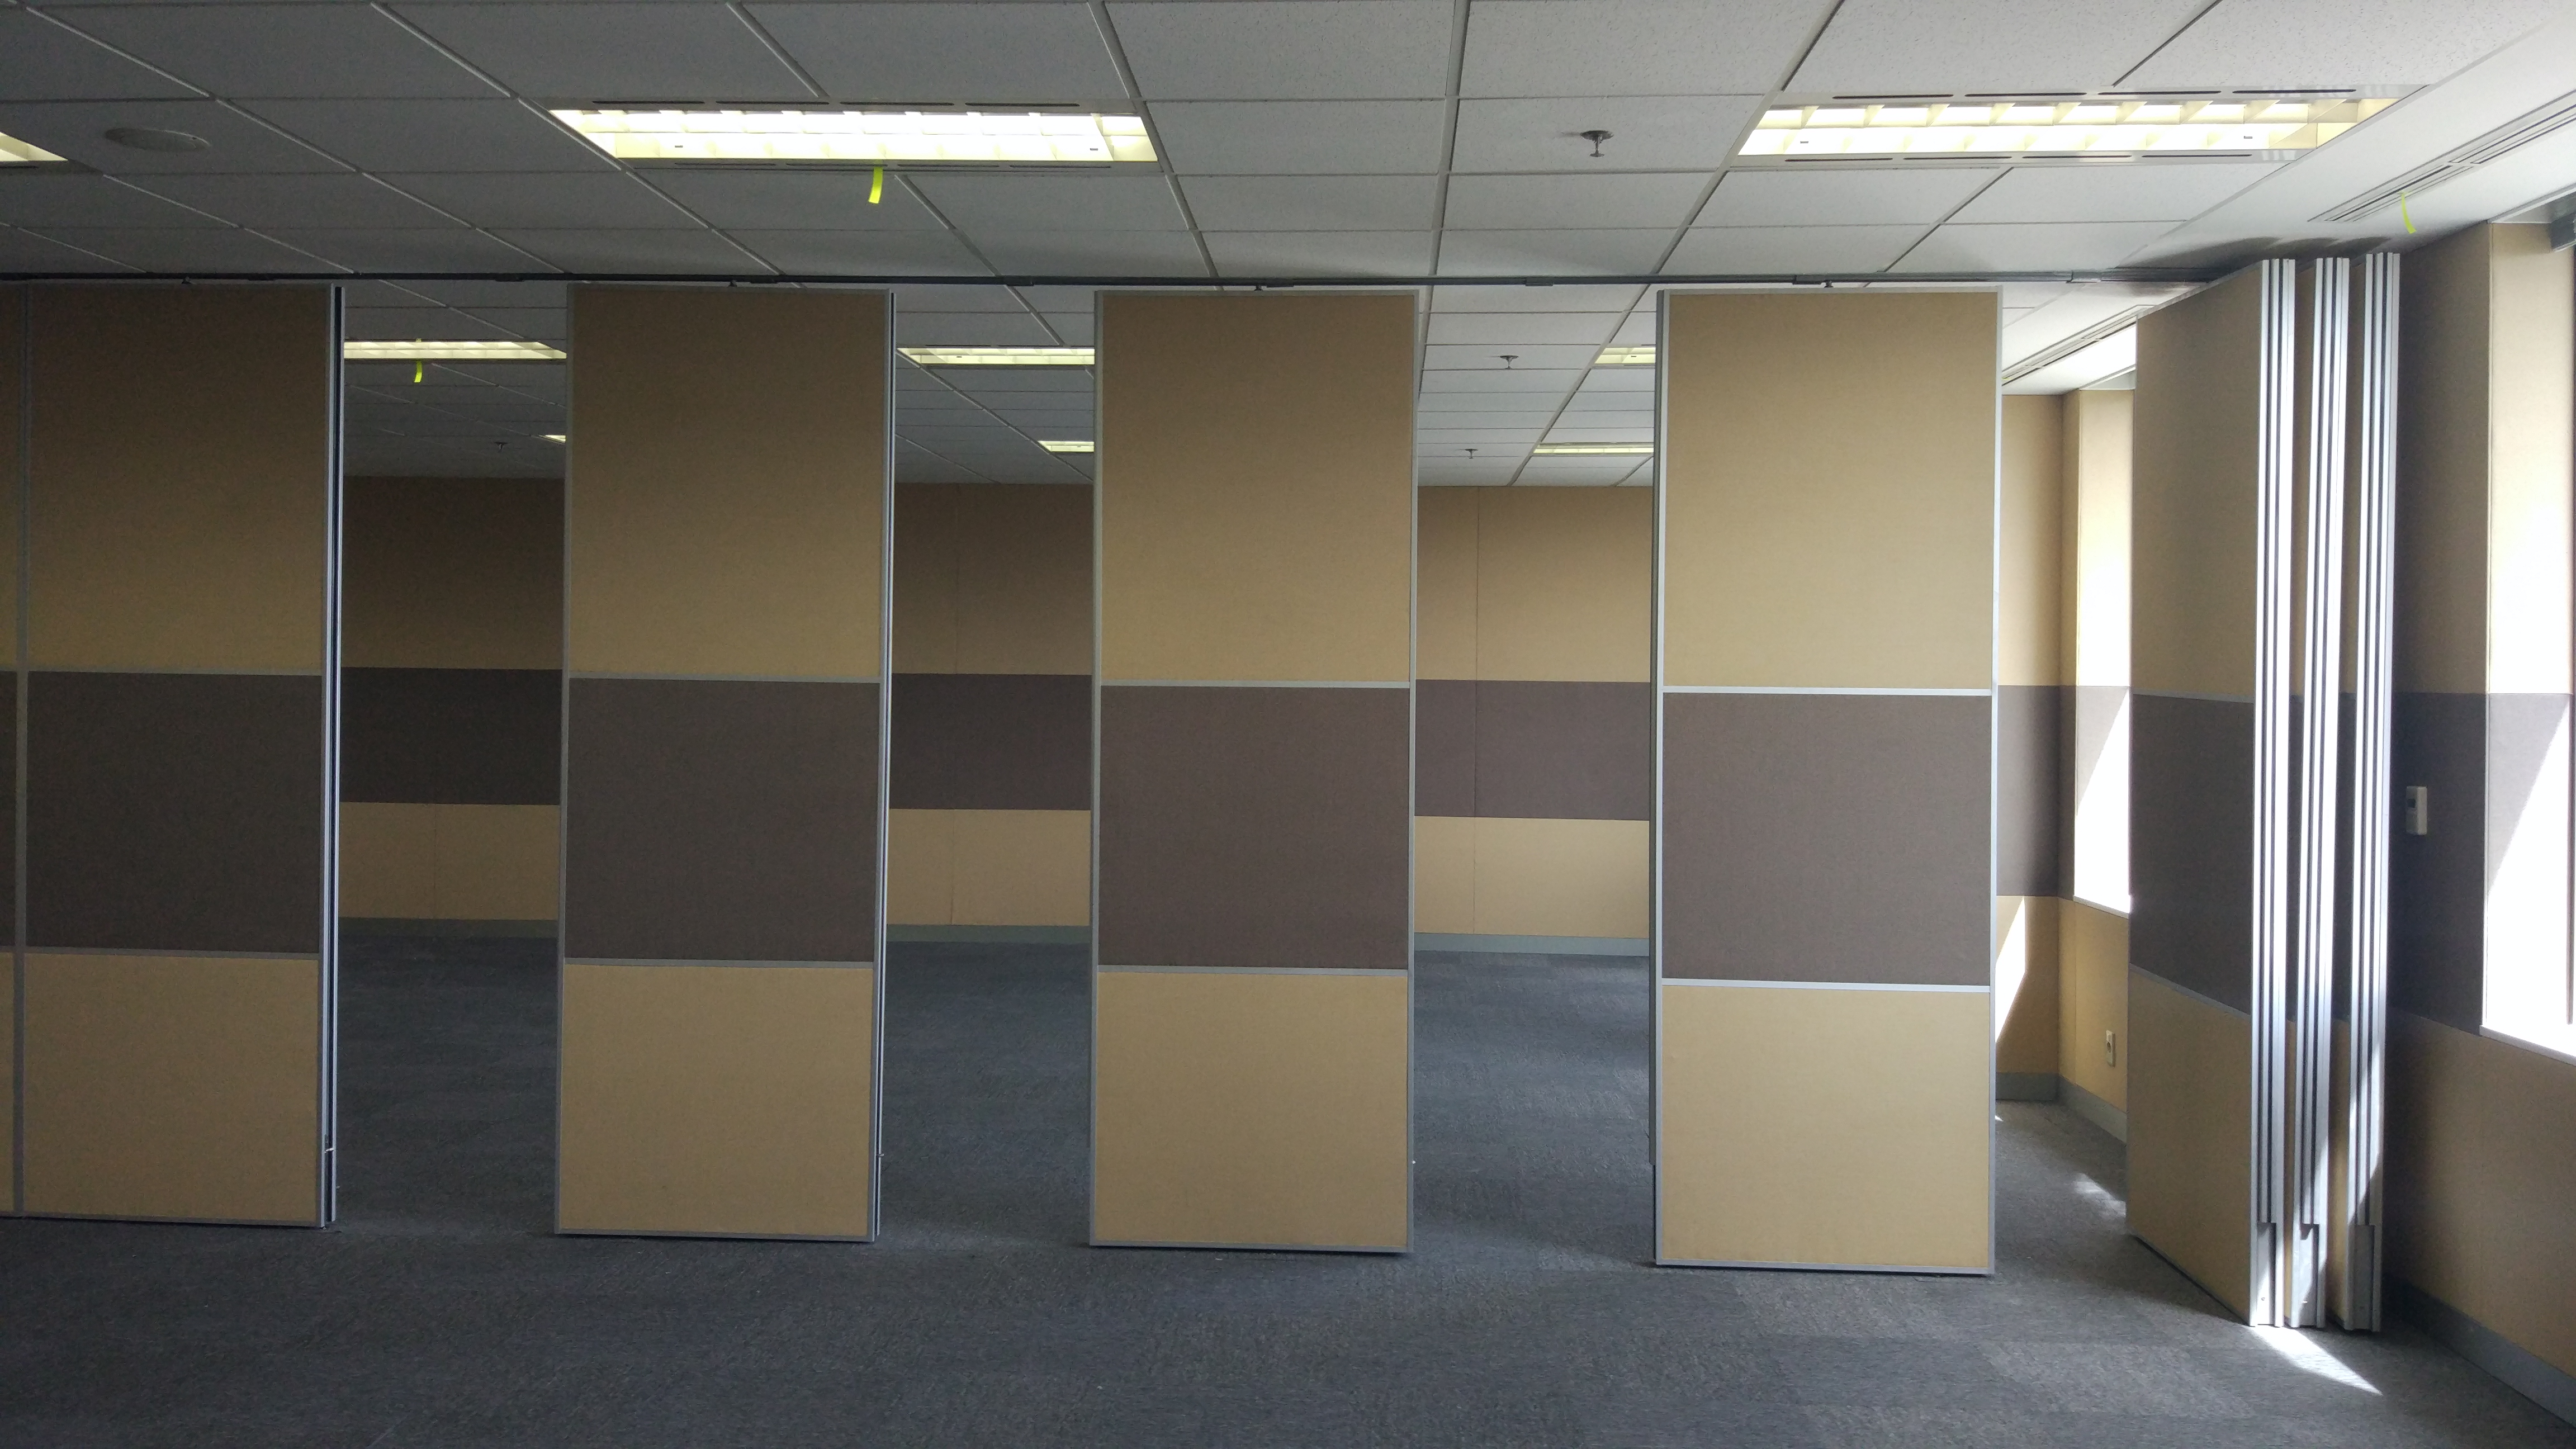 Preparing a Room for Seminar with Sliding Partition